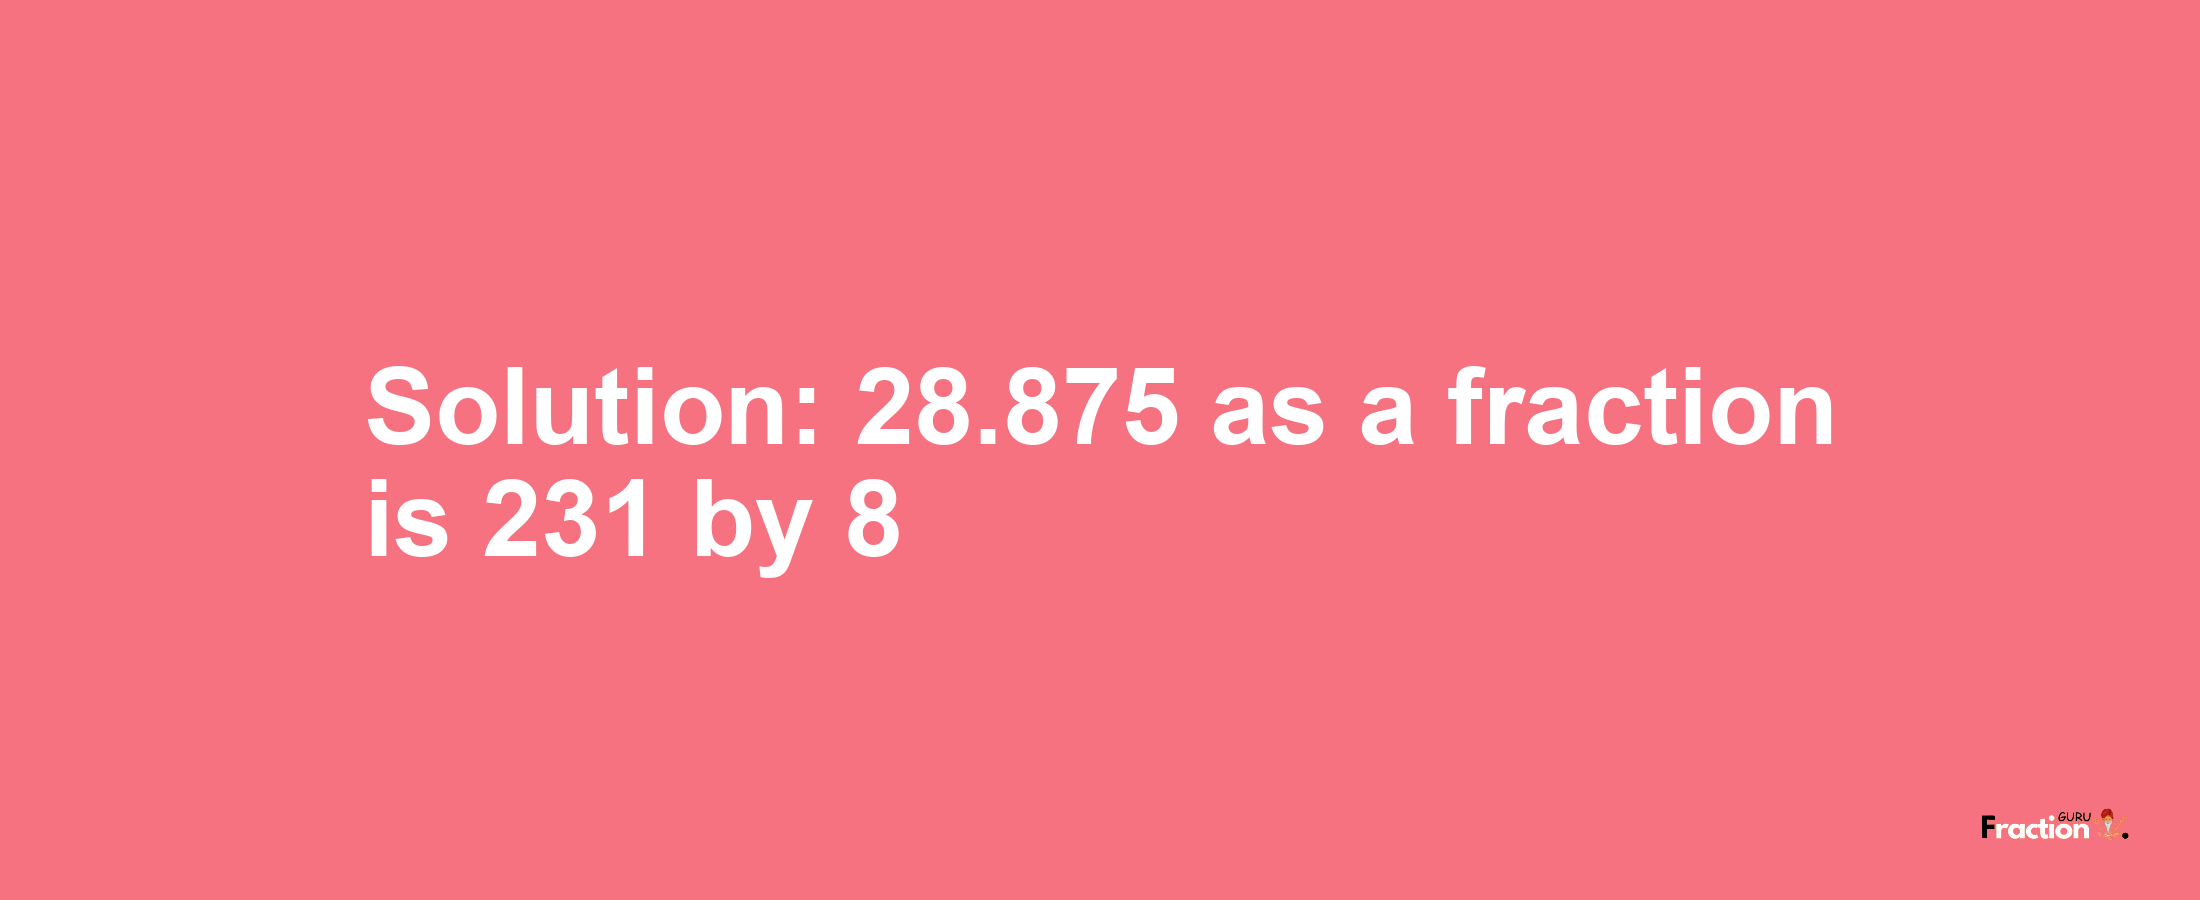 Solution:28.875 as a fraction is 231/8